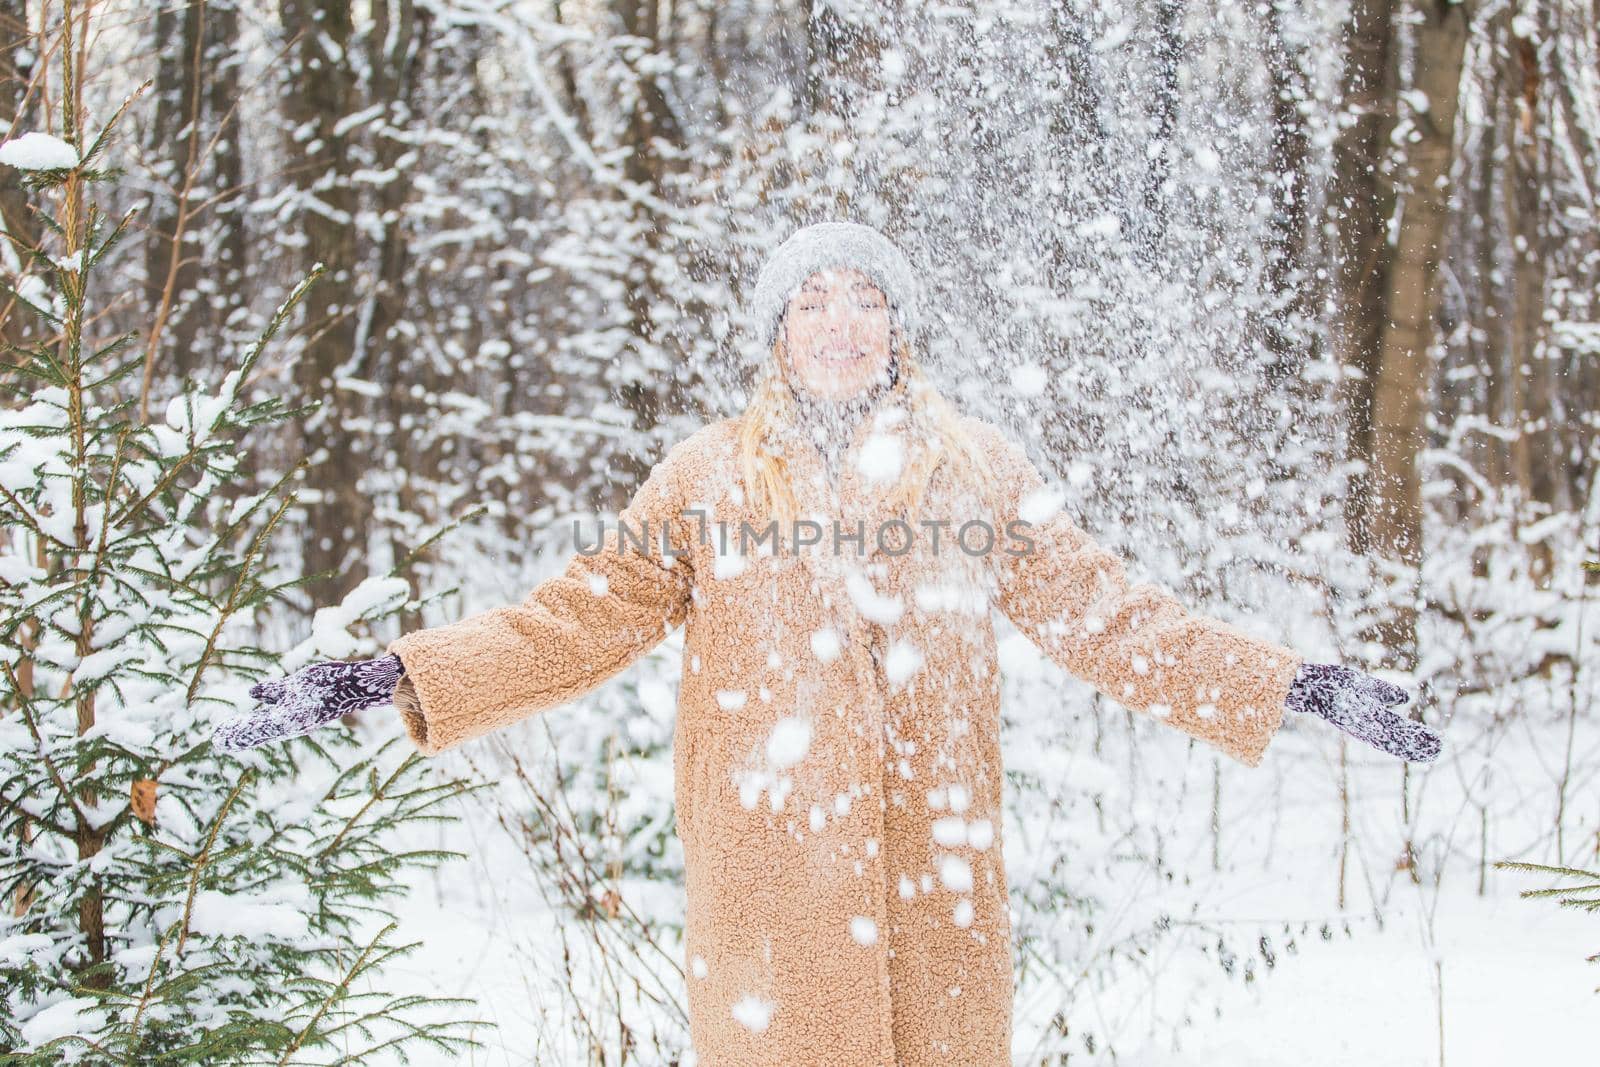 Young woman throwing snow in the air at sunny winter day, she is happy and fun